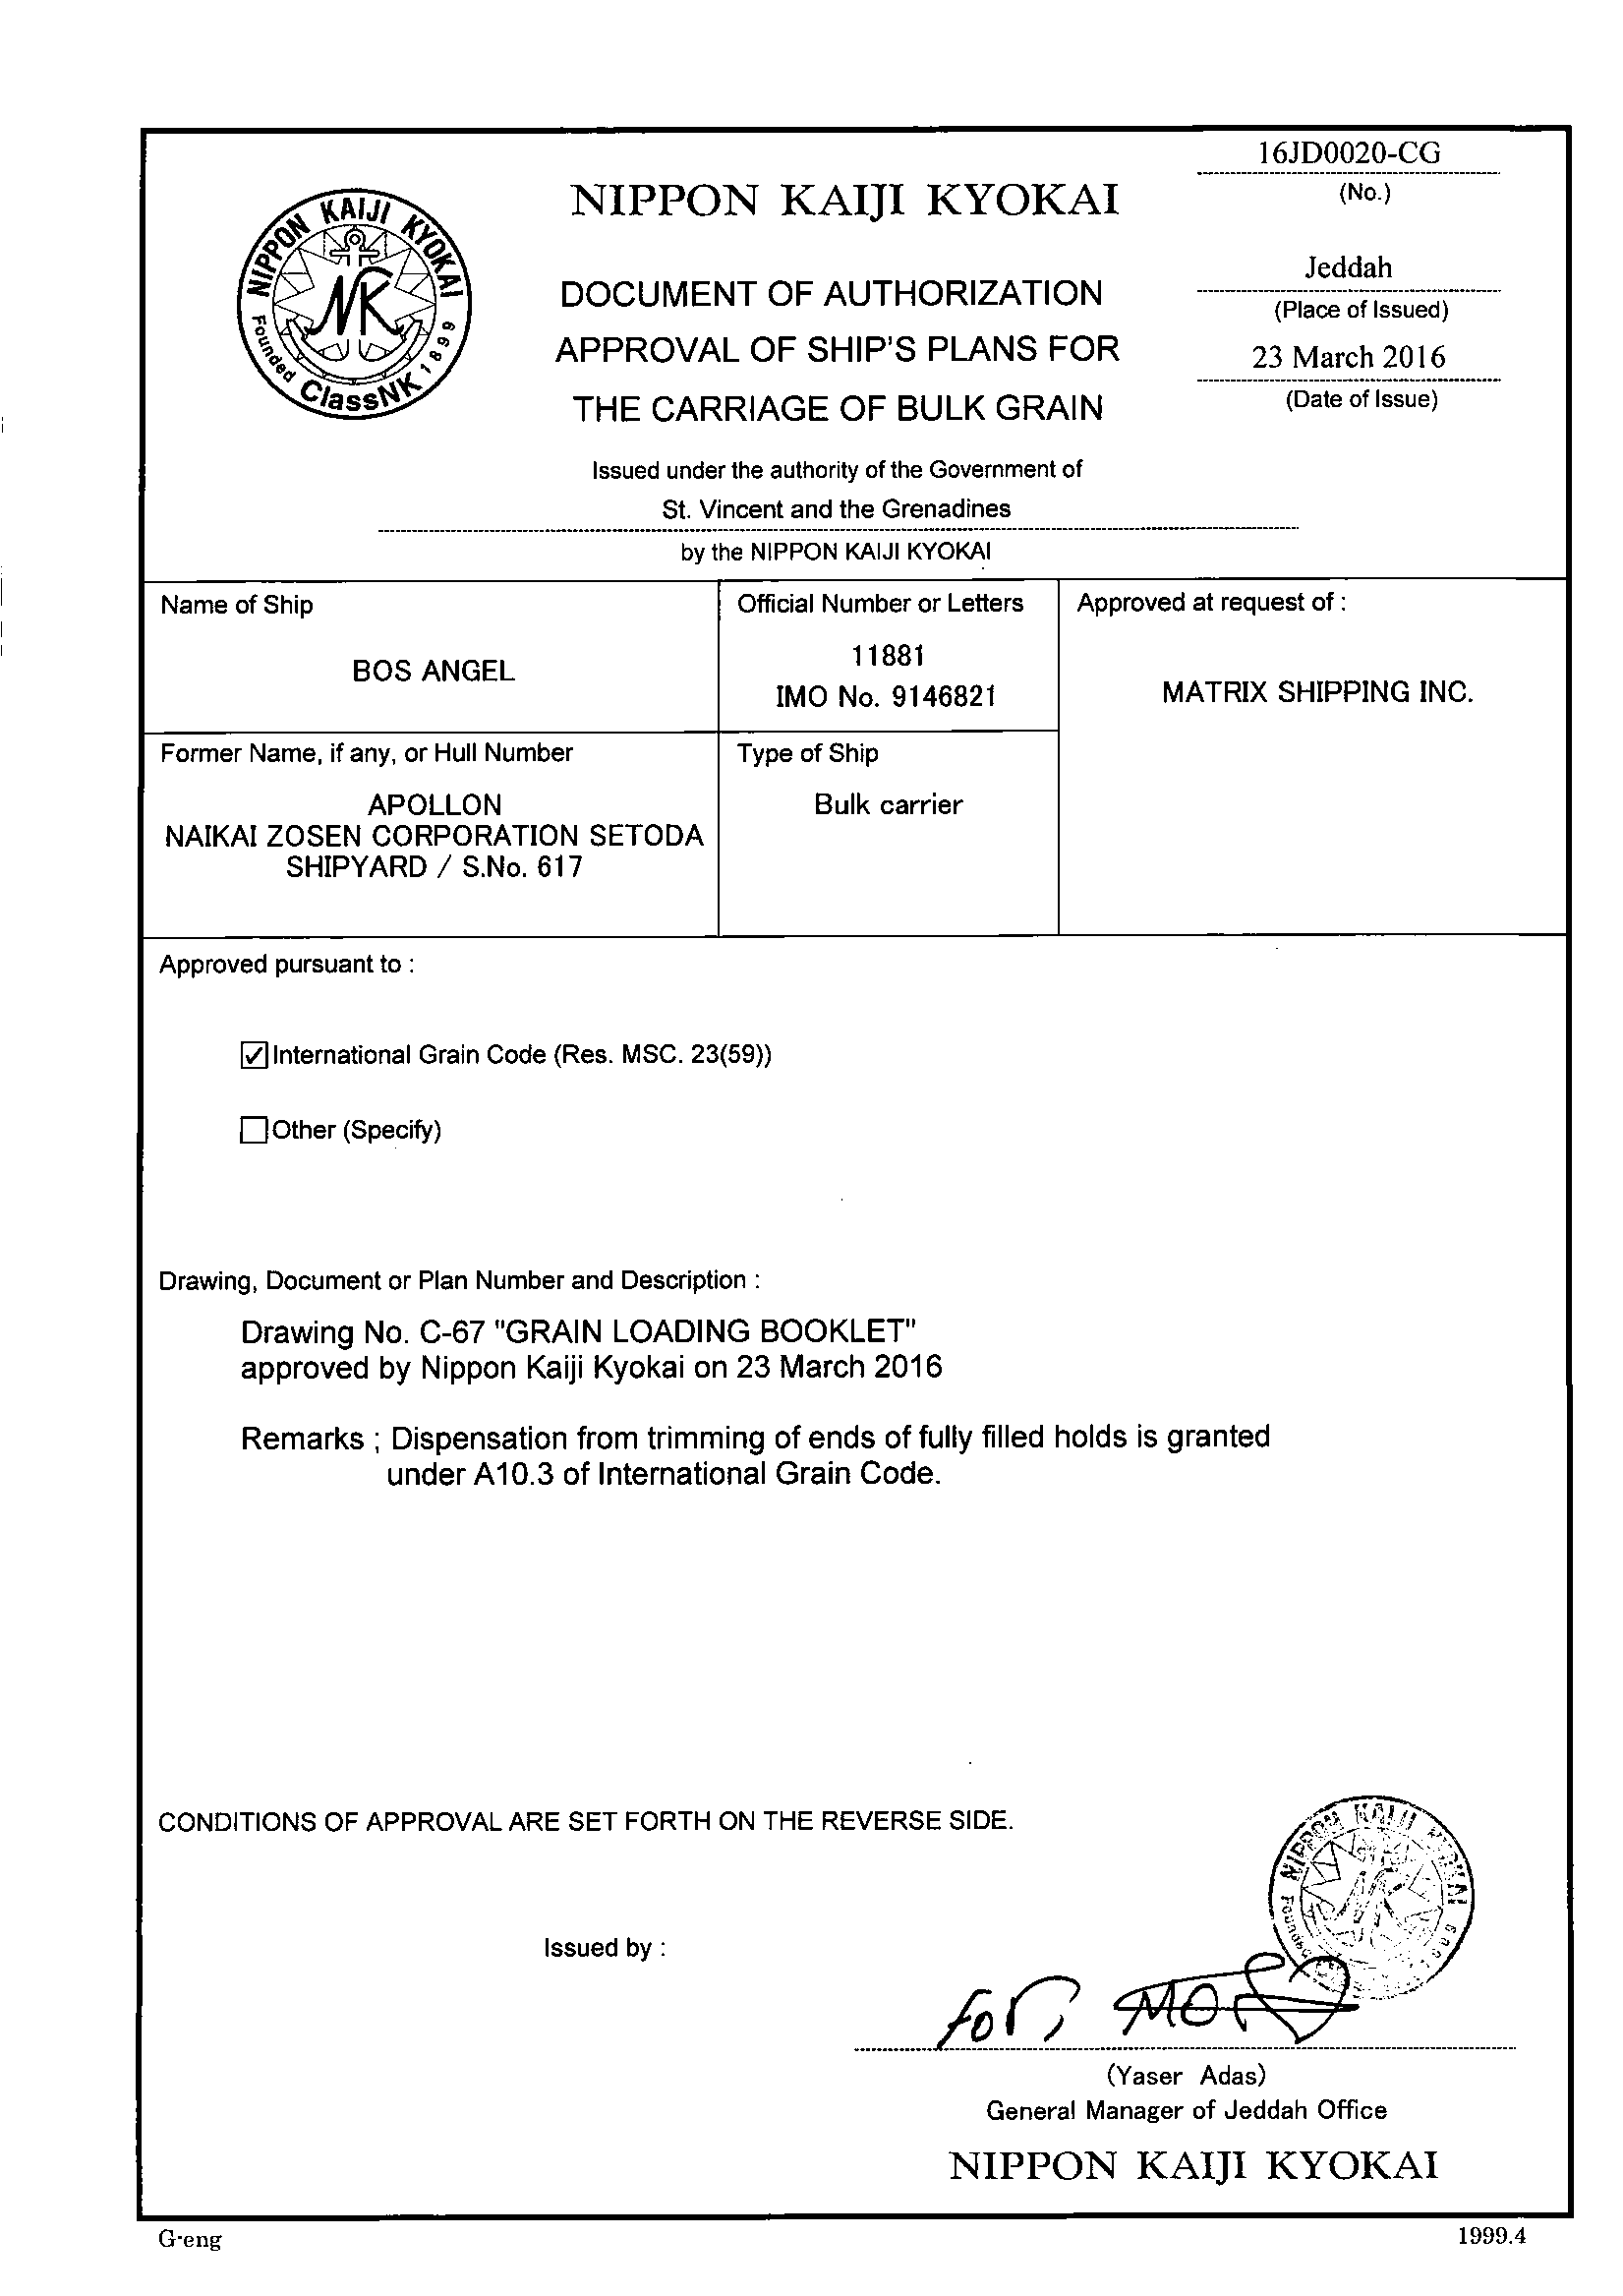 document of authorization for the carriage of grain